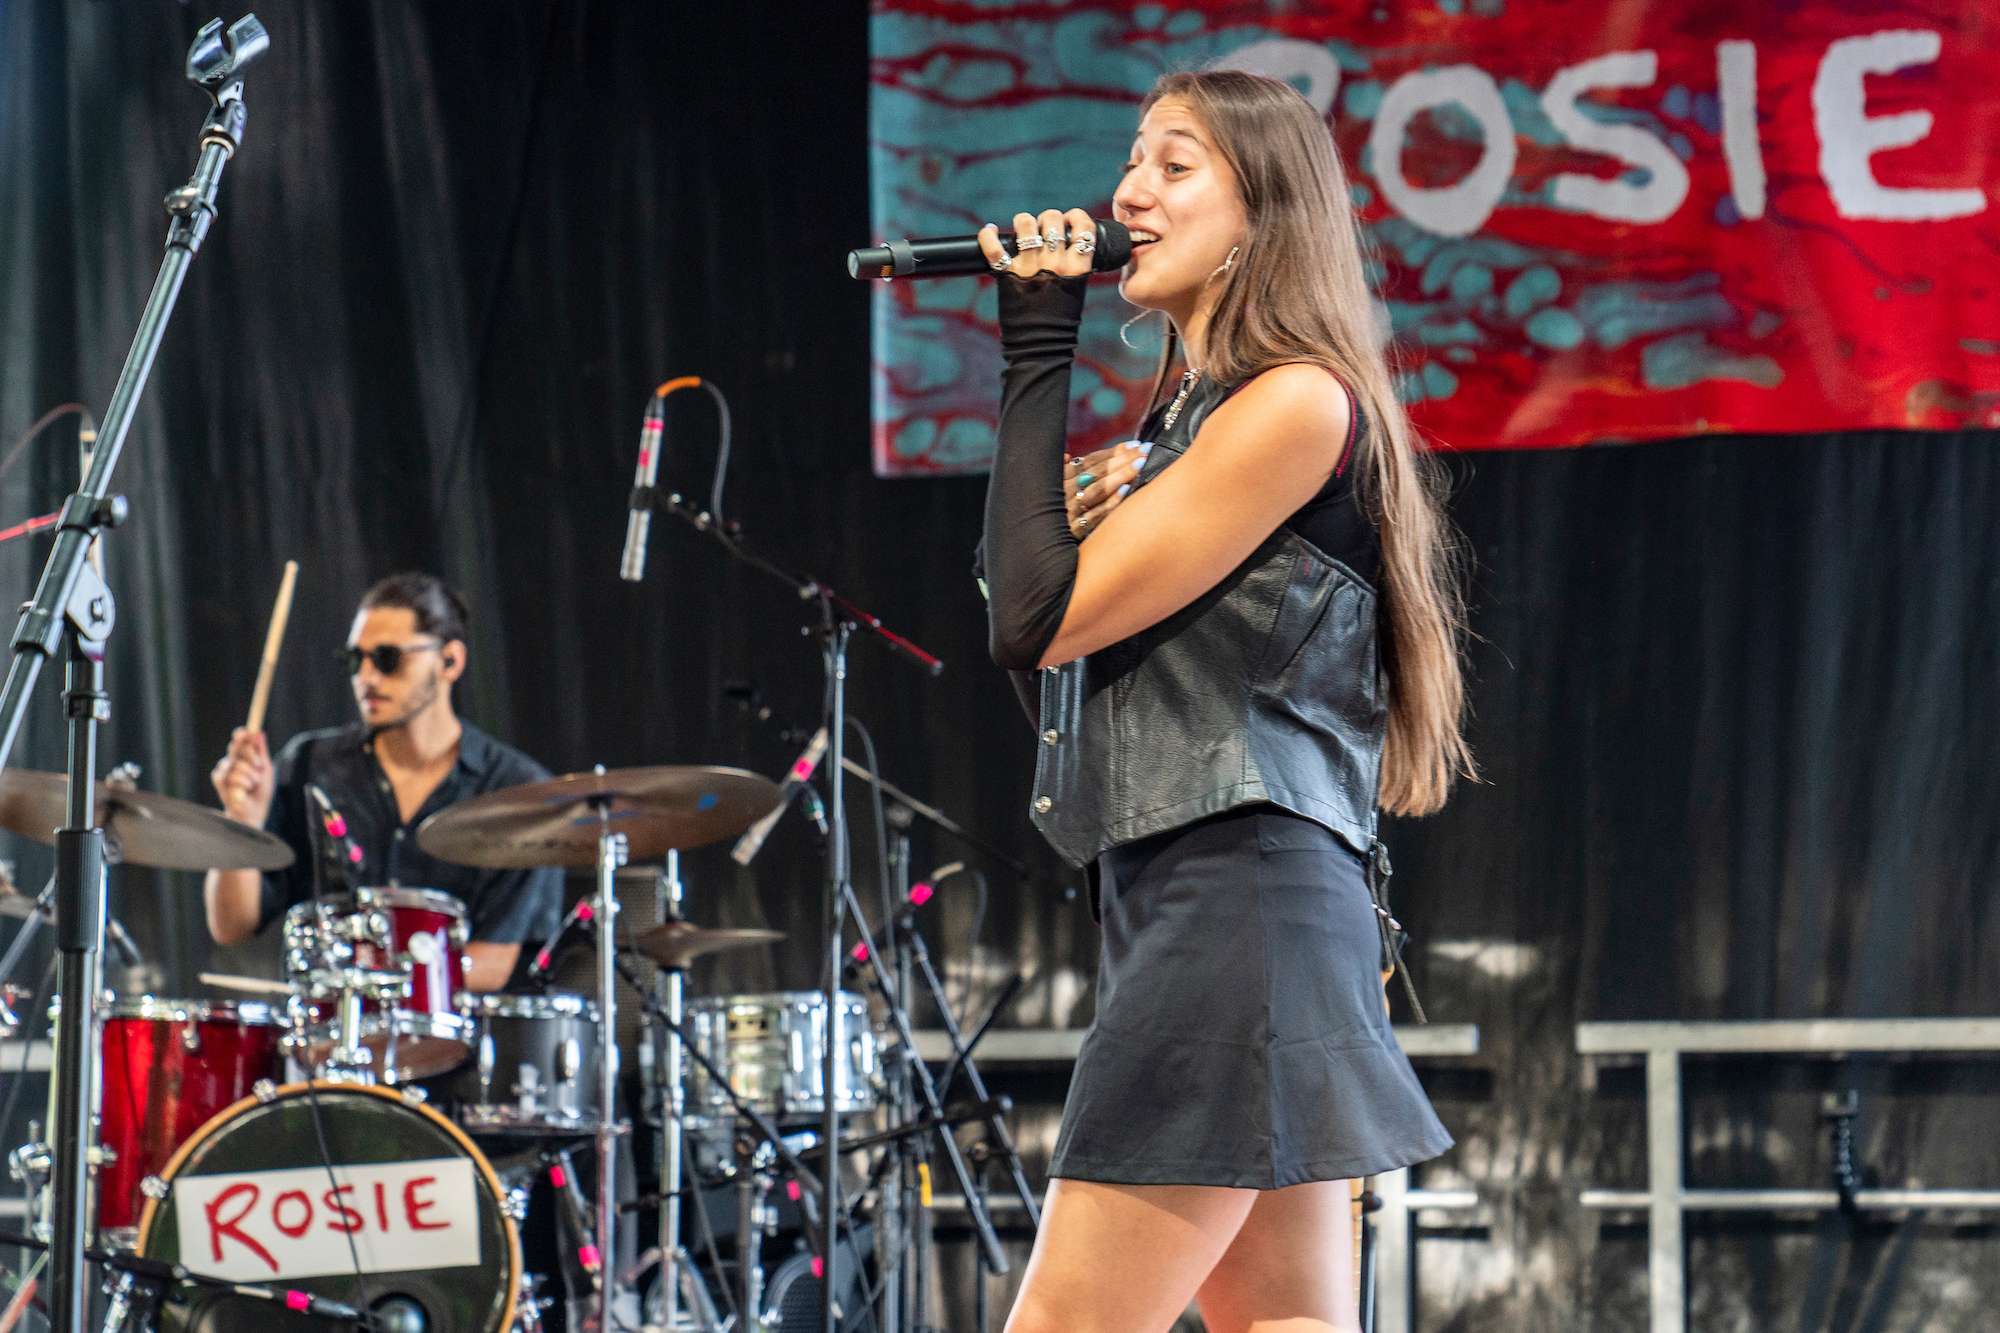 Rosie Live at Lollapalooza [GALLERY] 1